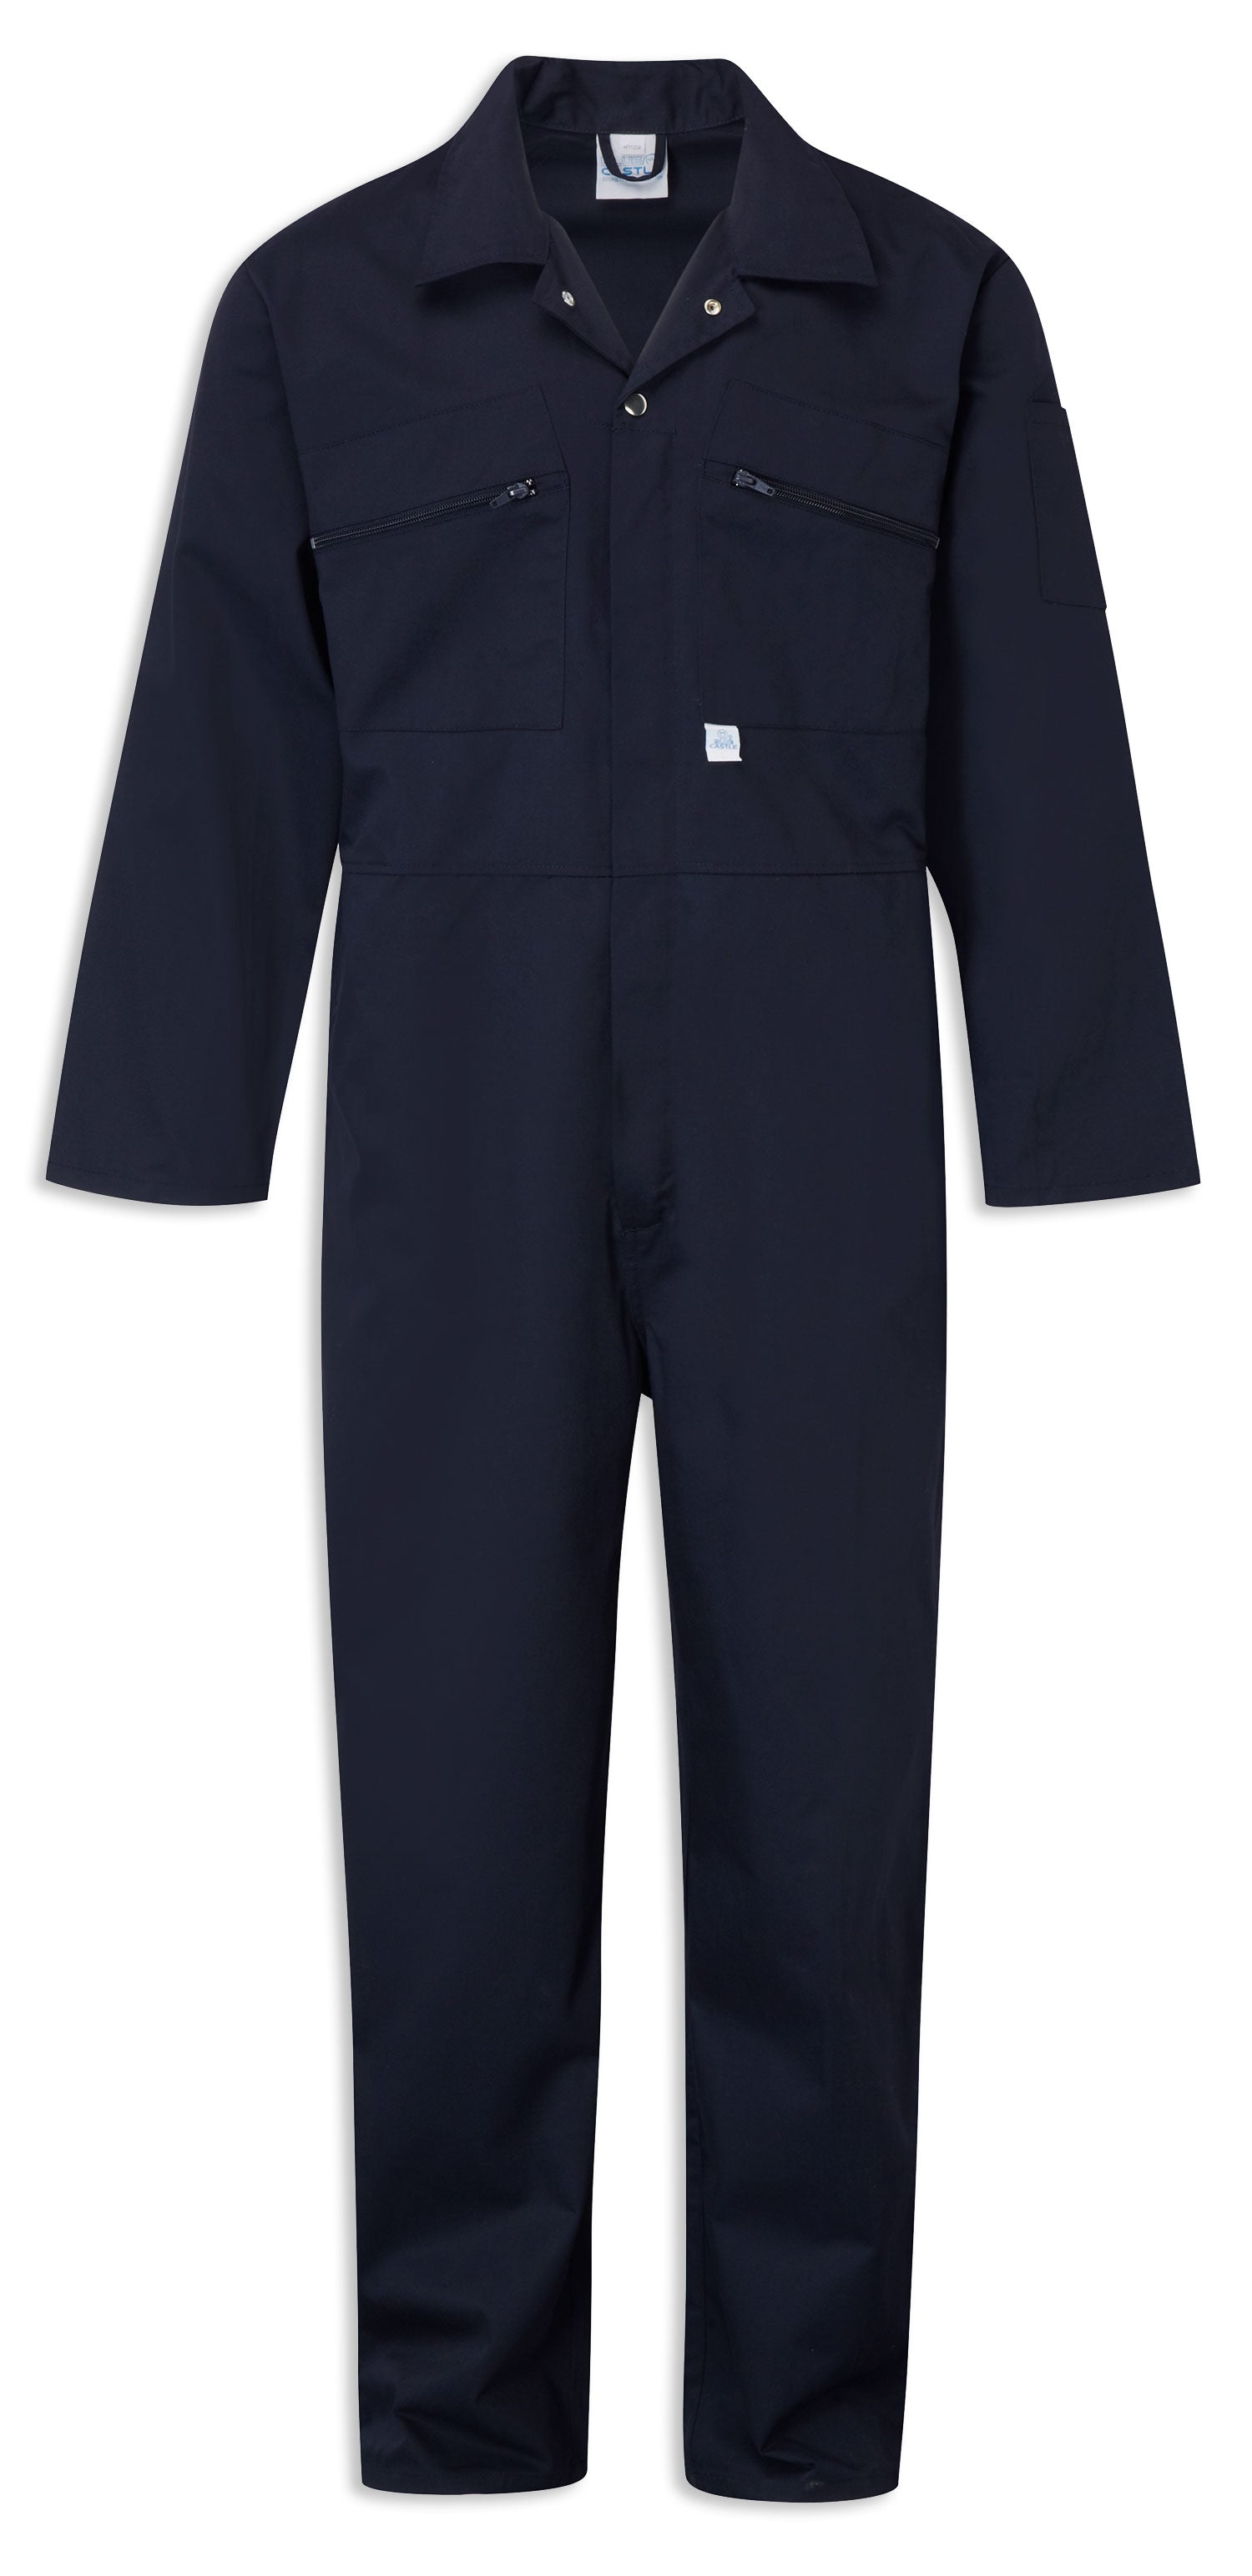 Navy Blue Fort Polycotton Zip Fastening Overalls by Castle